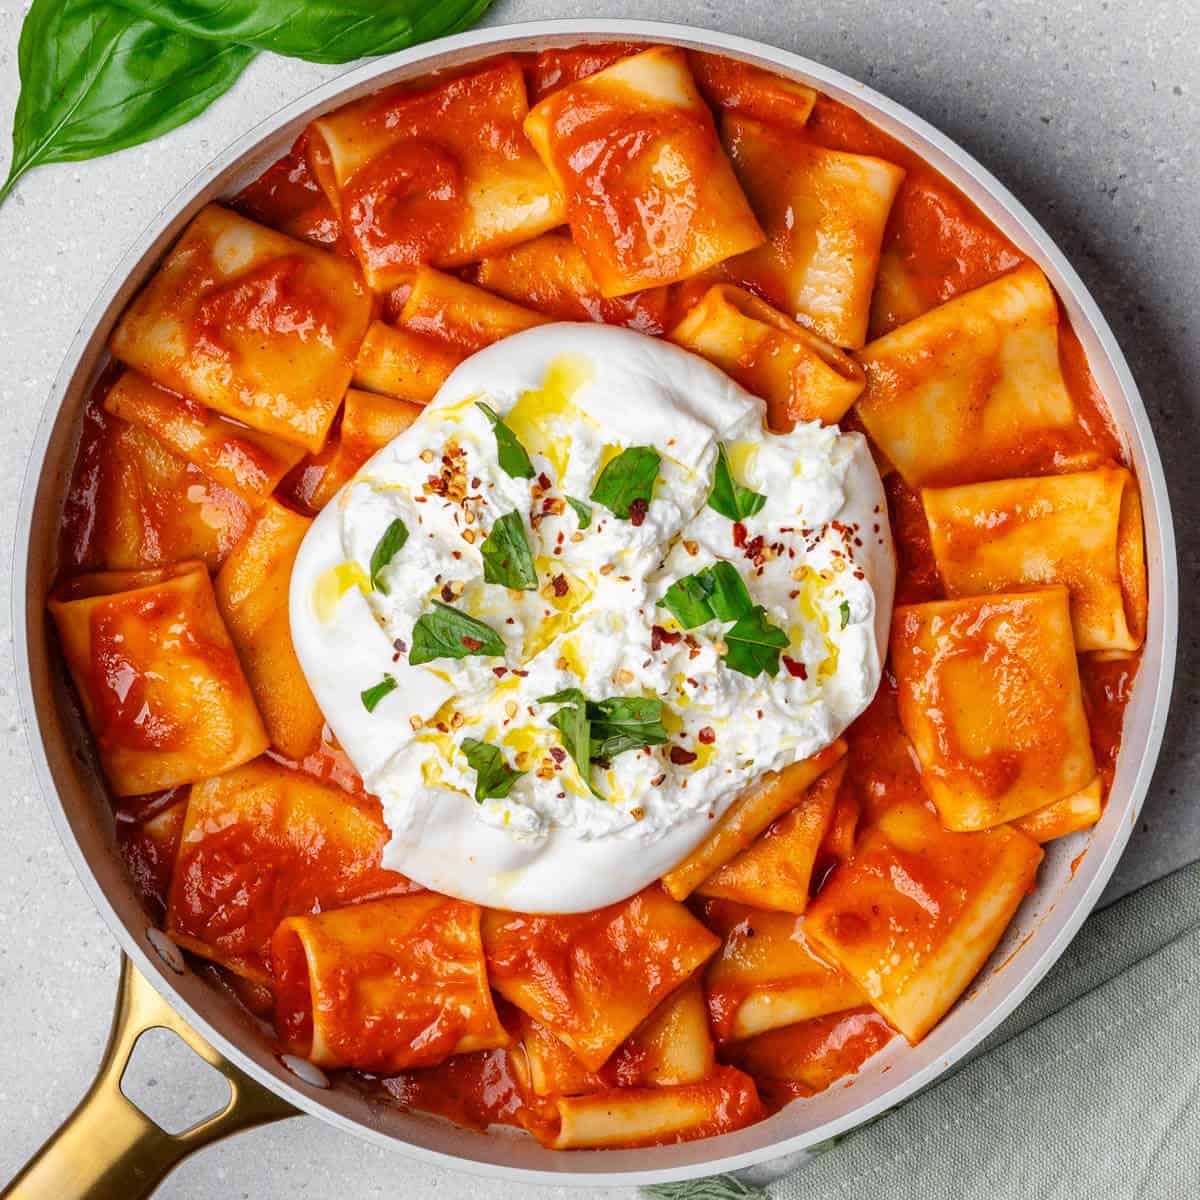 30 Minute Chicken with Braised Tomatoes and Burrata - Serving Dumplings